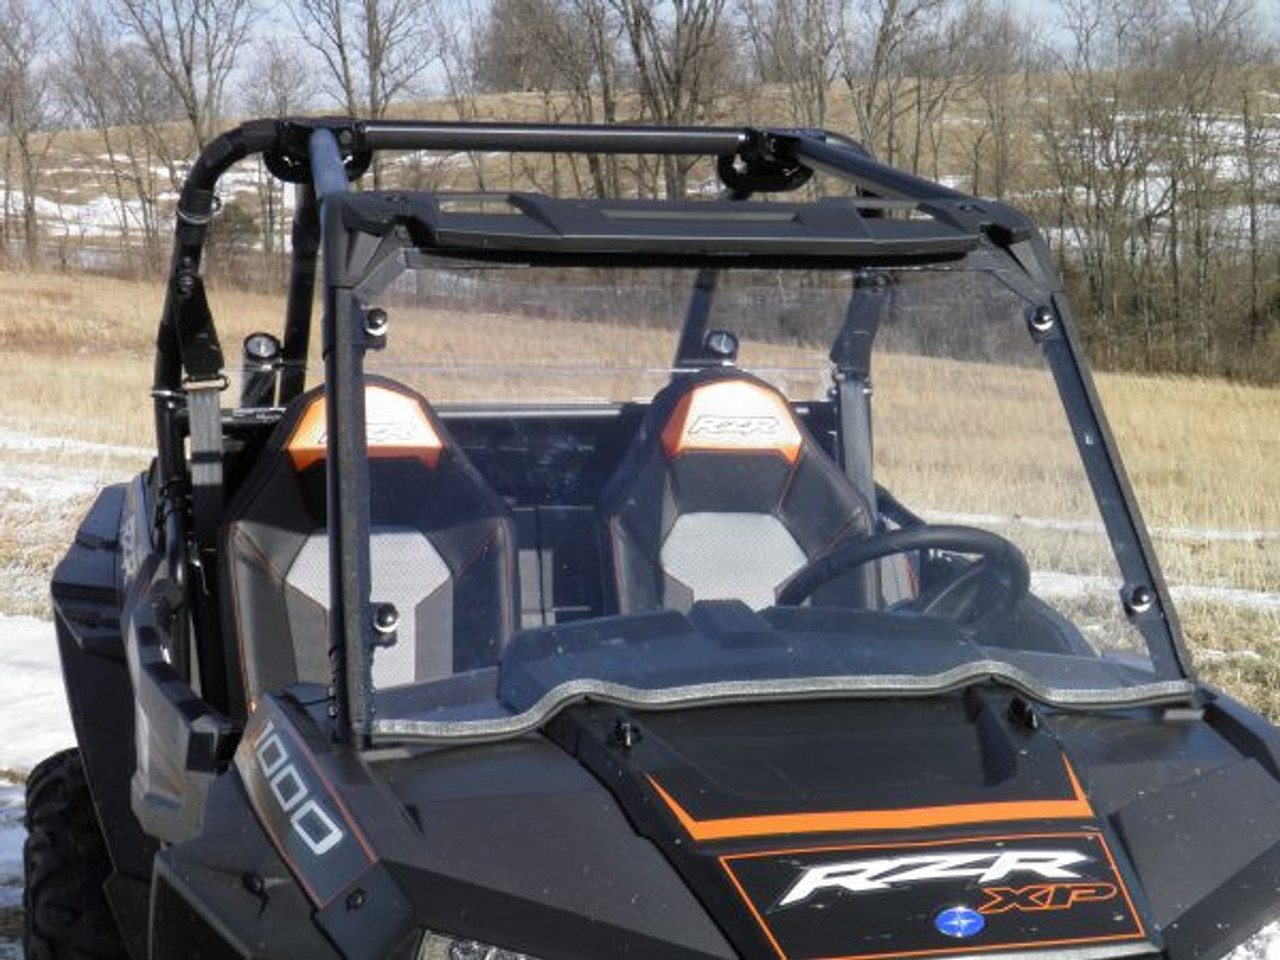 3 Star side x side accessories Polaris RZR XP1000/XP Turbo/S1000 windshield front angle view